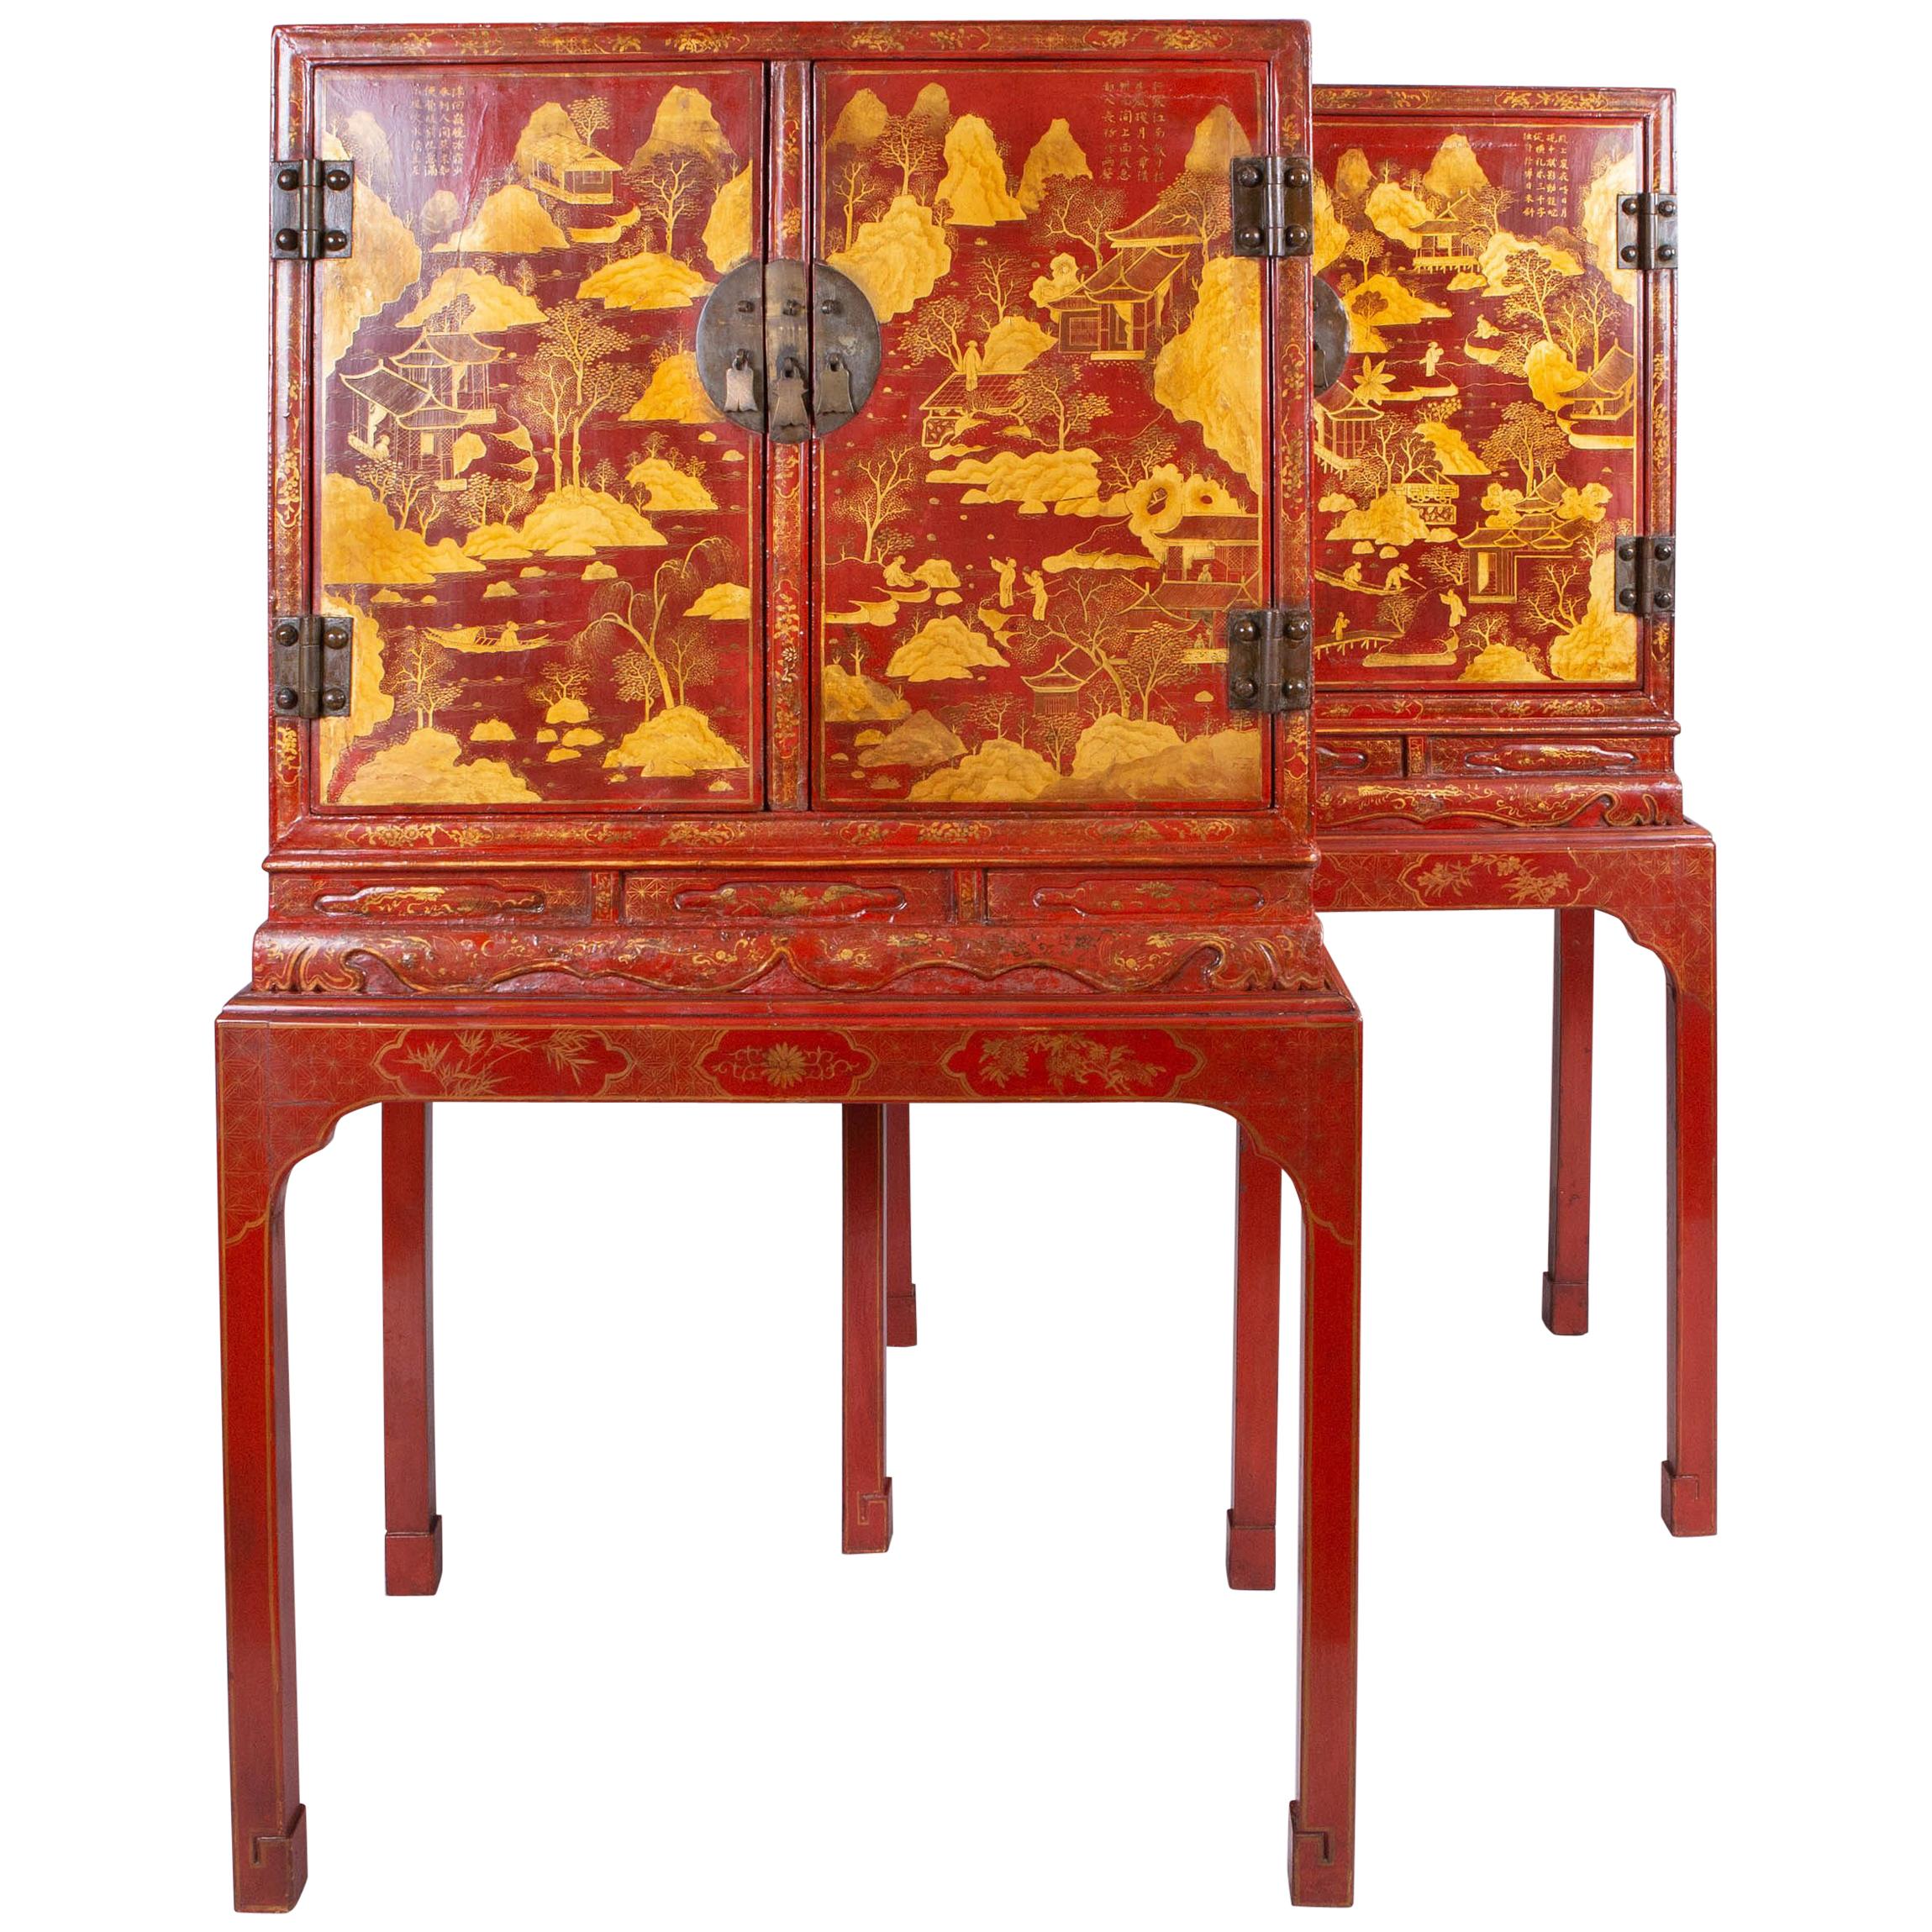 Pair of Chinese Export Bronze-Mounted Red Lacquer and Parcel-Gilt Cabinets For Sale